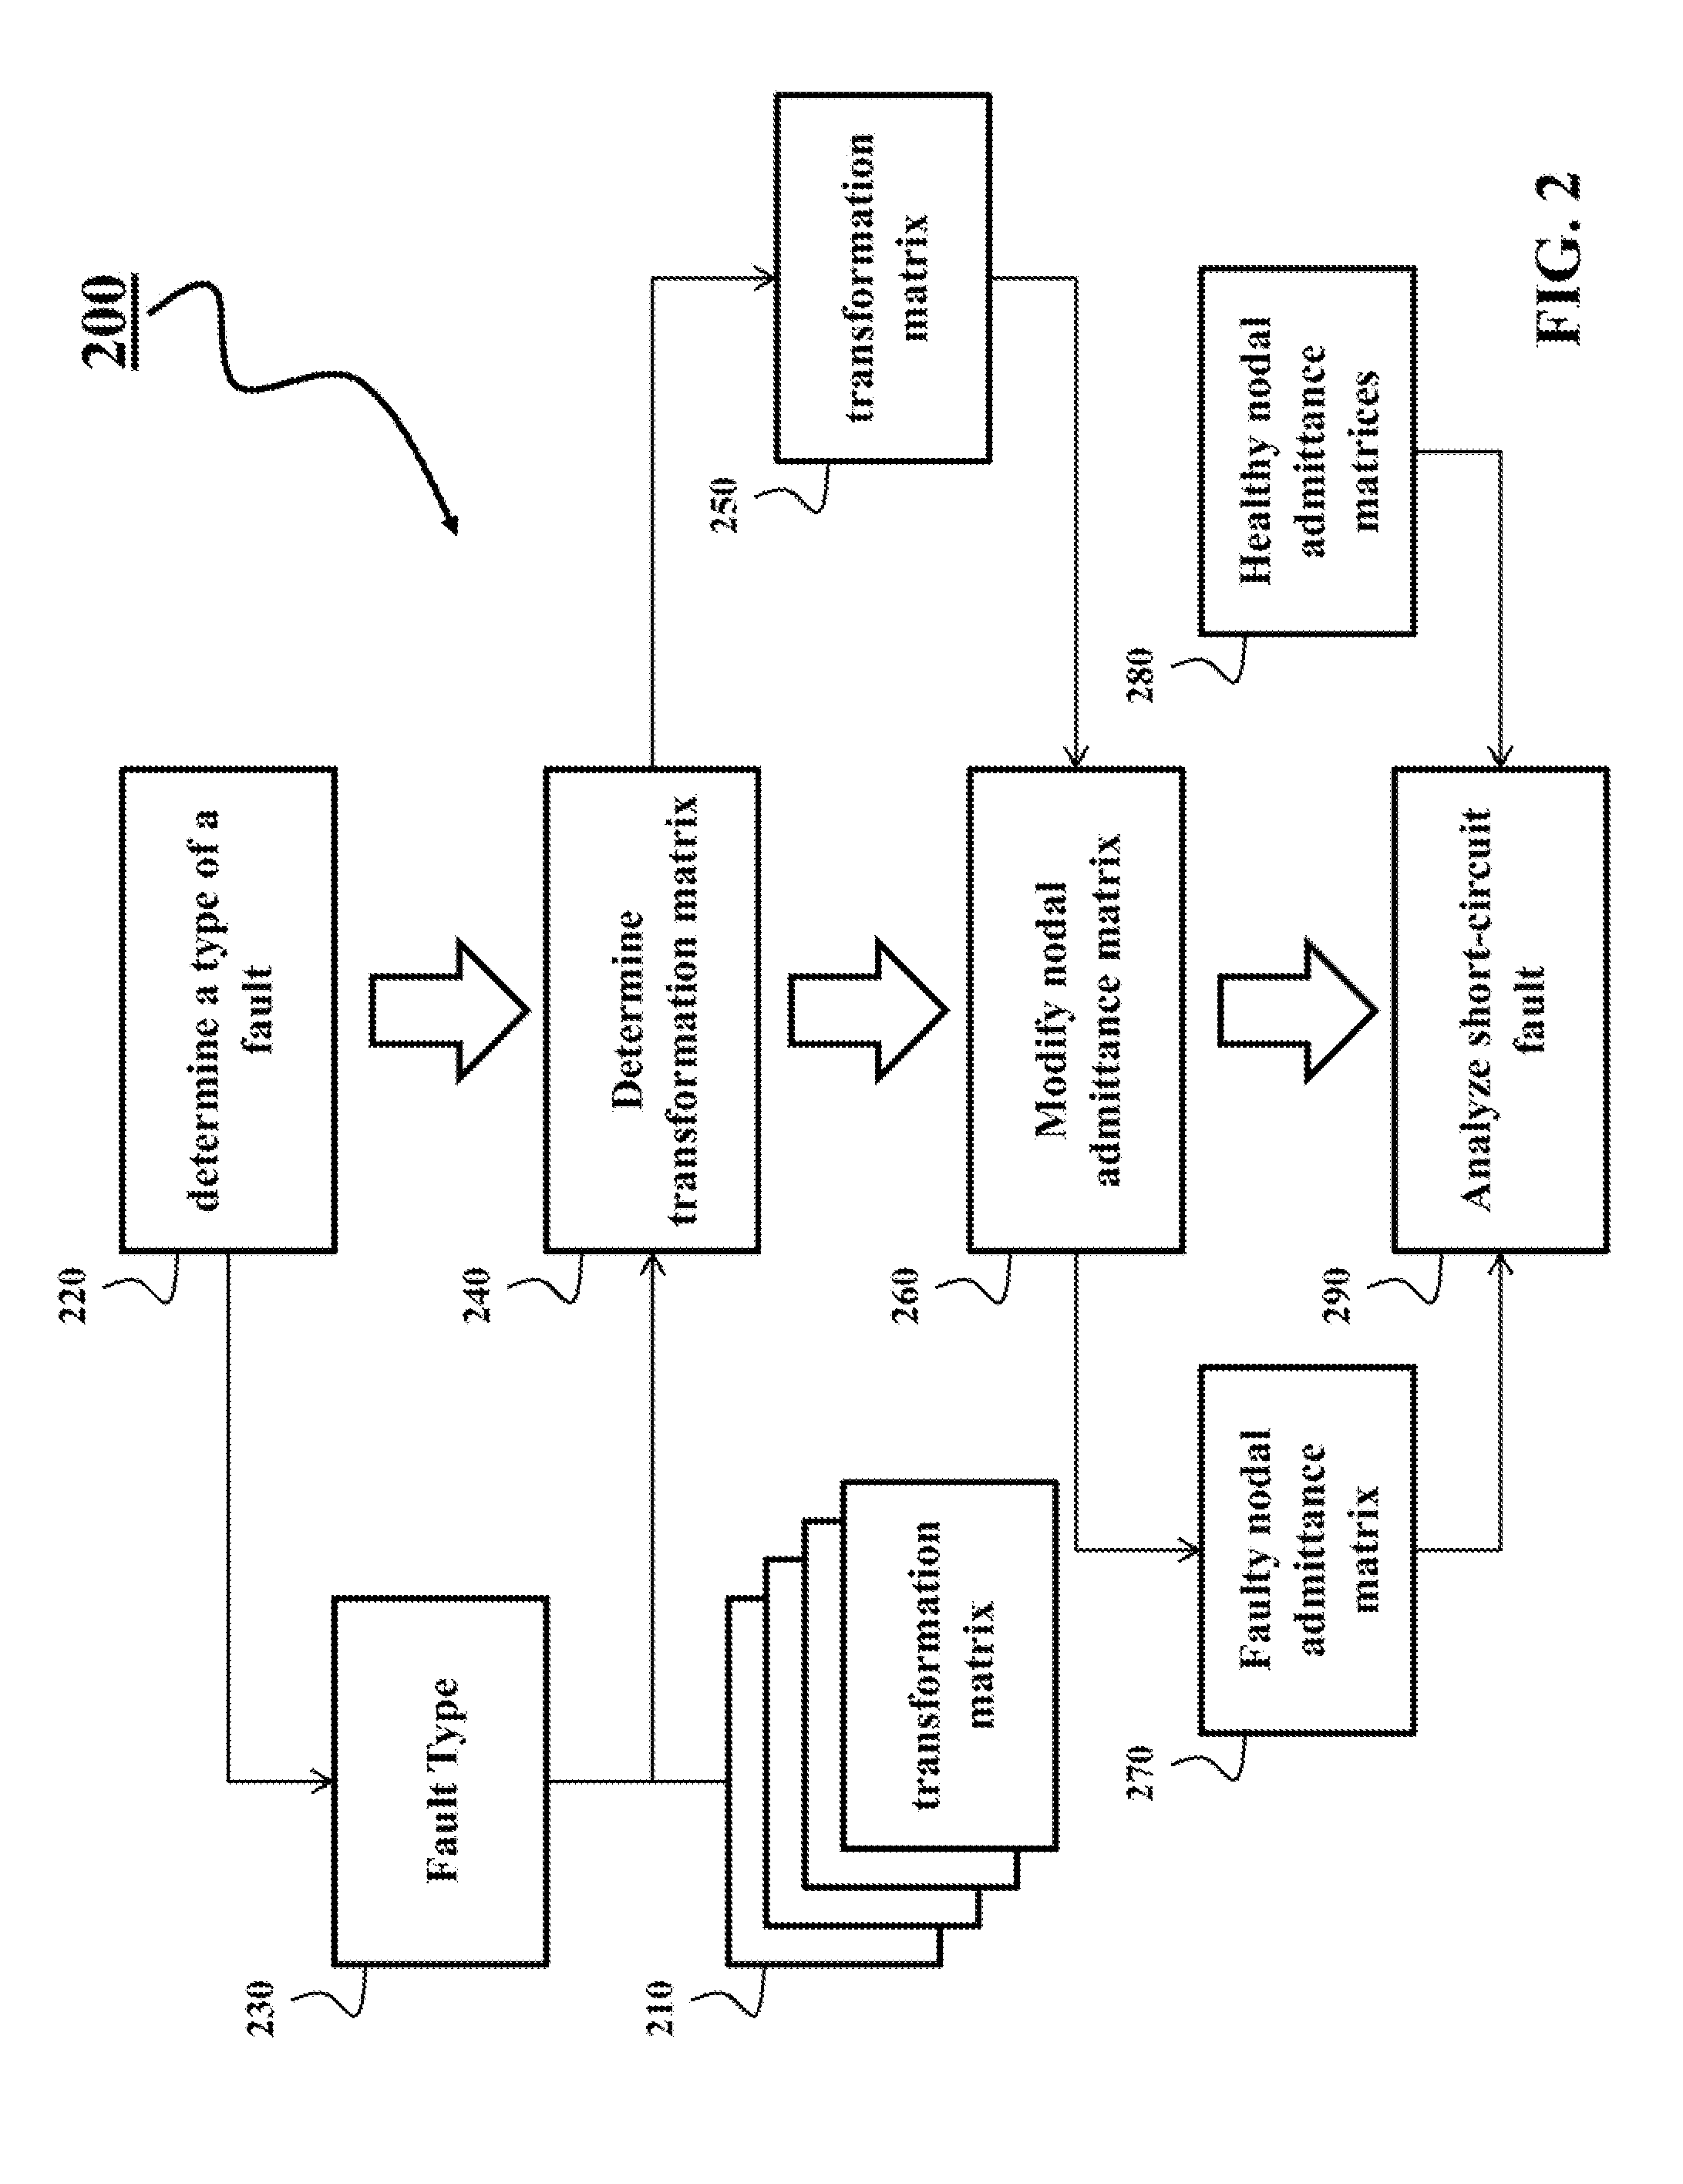 Method for Analyzing Faults in Ungrounded Power Distribution Systems